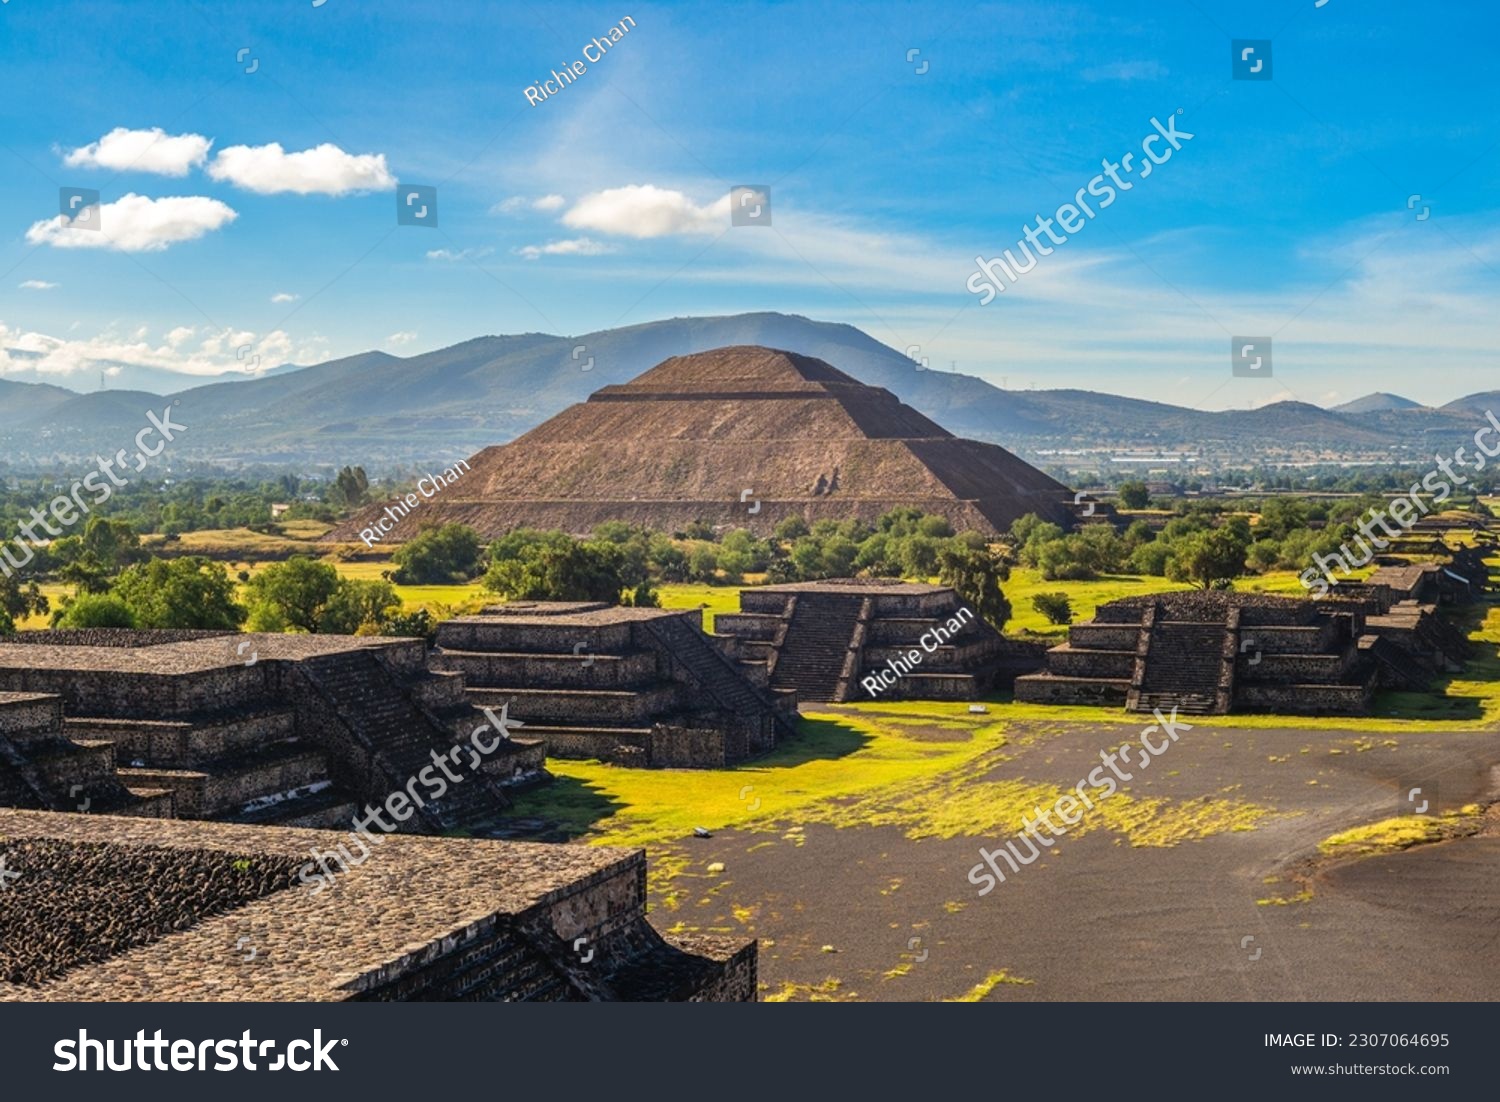 Pyramid of sun in Teotihuacan, UNESCO World Heritage site of mexico #2307064695